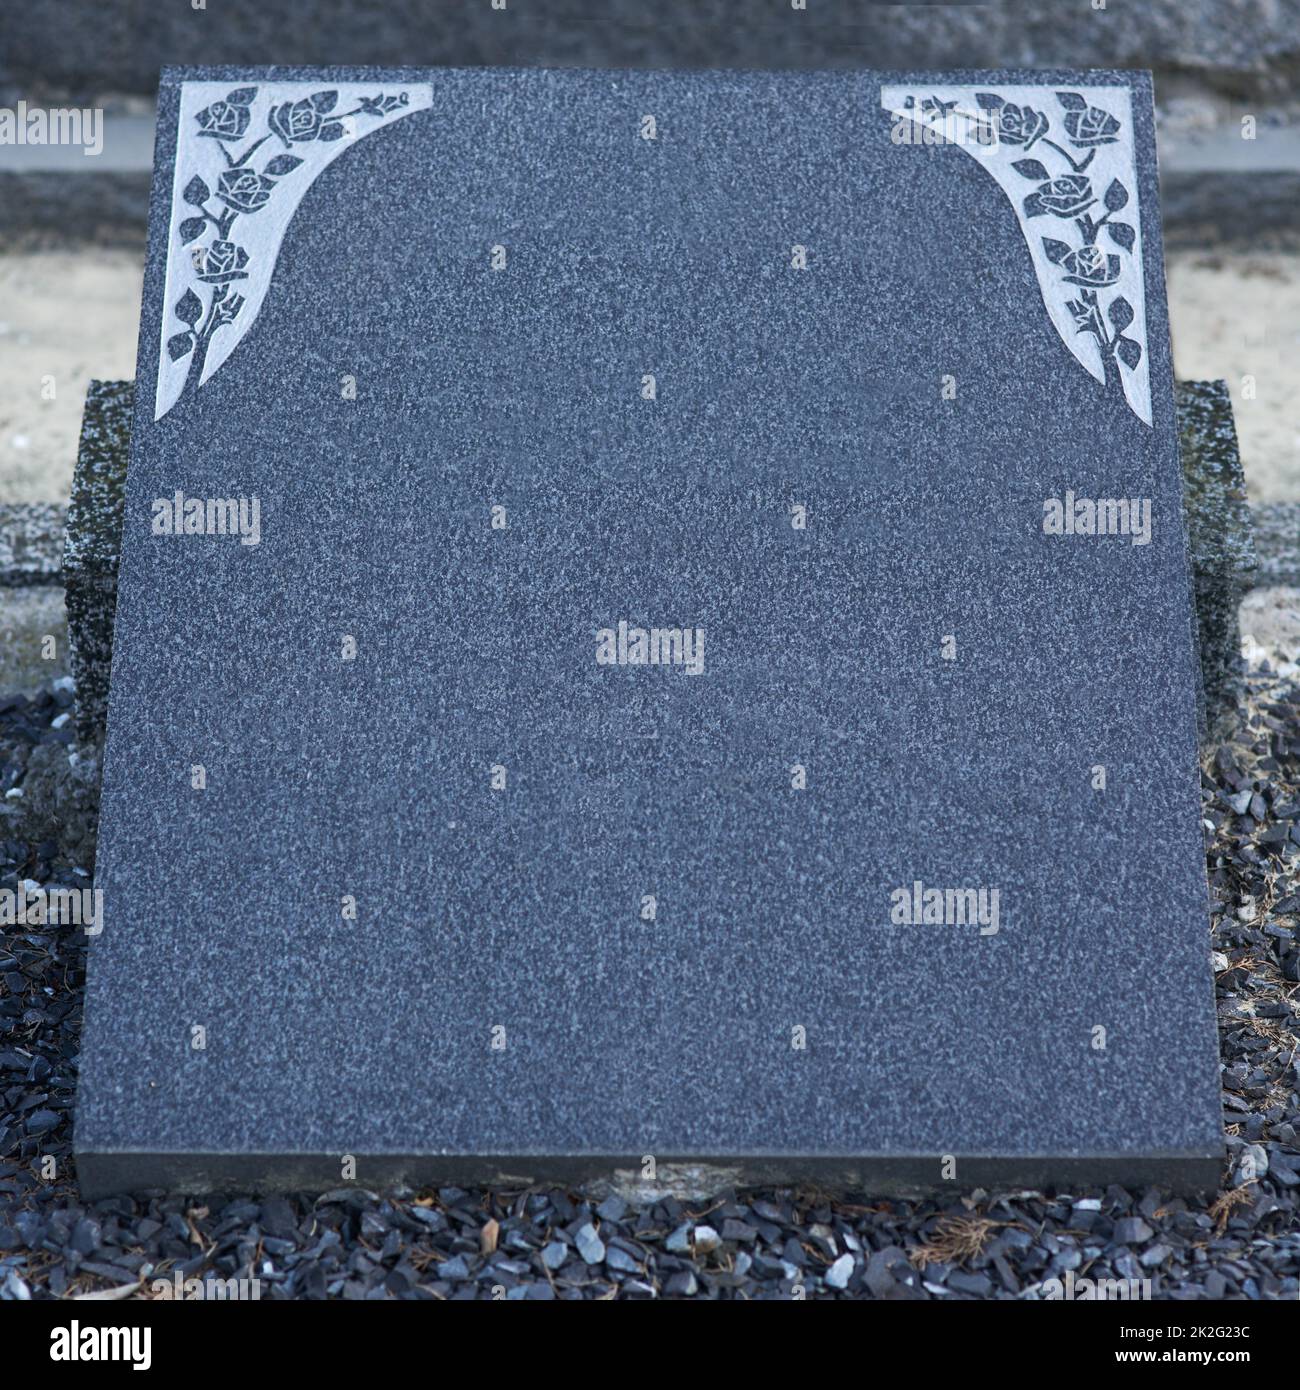 Wonderfully designed to immortalize their memory. Shot of a gravestone in a cemetery. Stock Photo